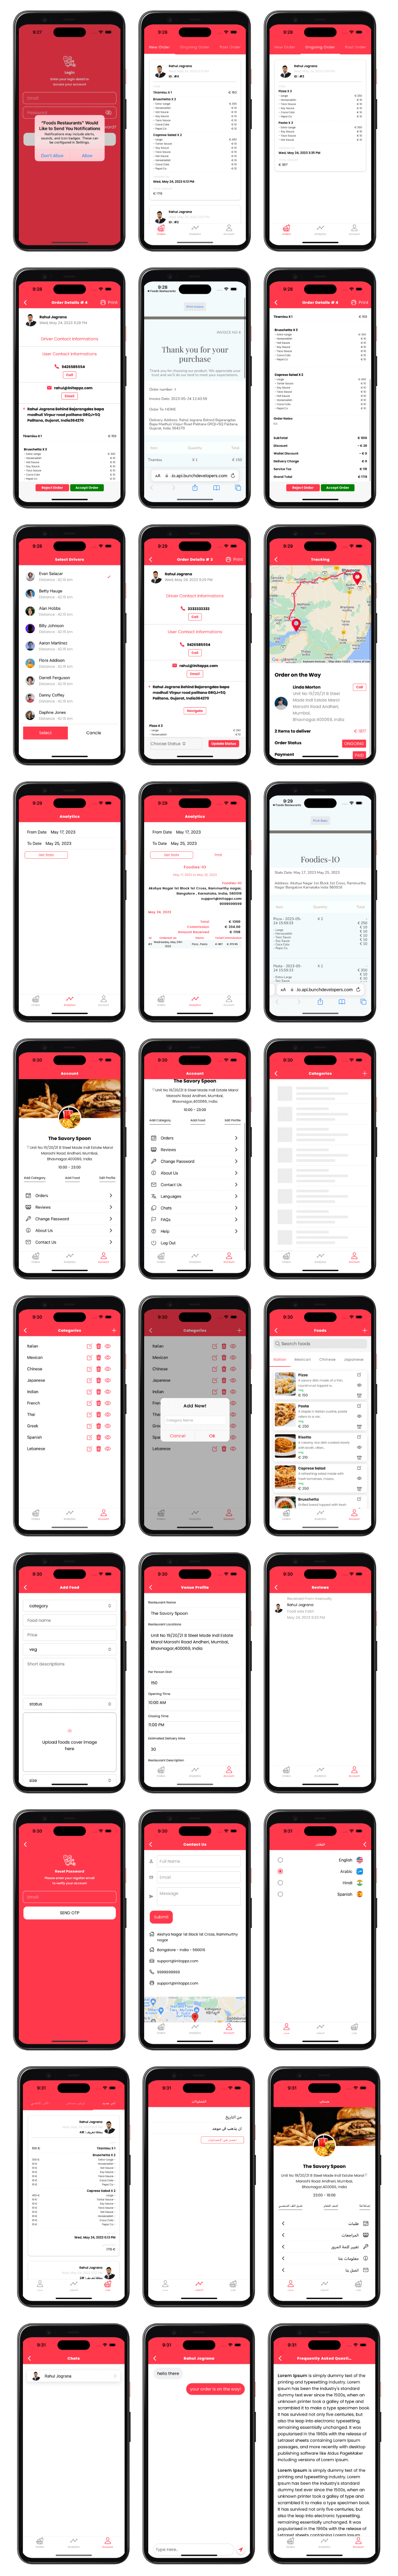 Food Delivery Multi Restaurant Ionic 7 + Laravel (Android + iOS + Website + Admin) - 4